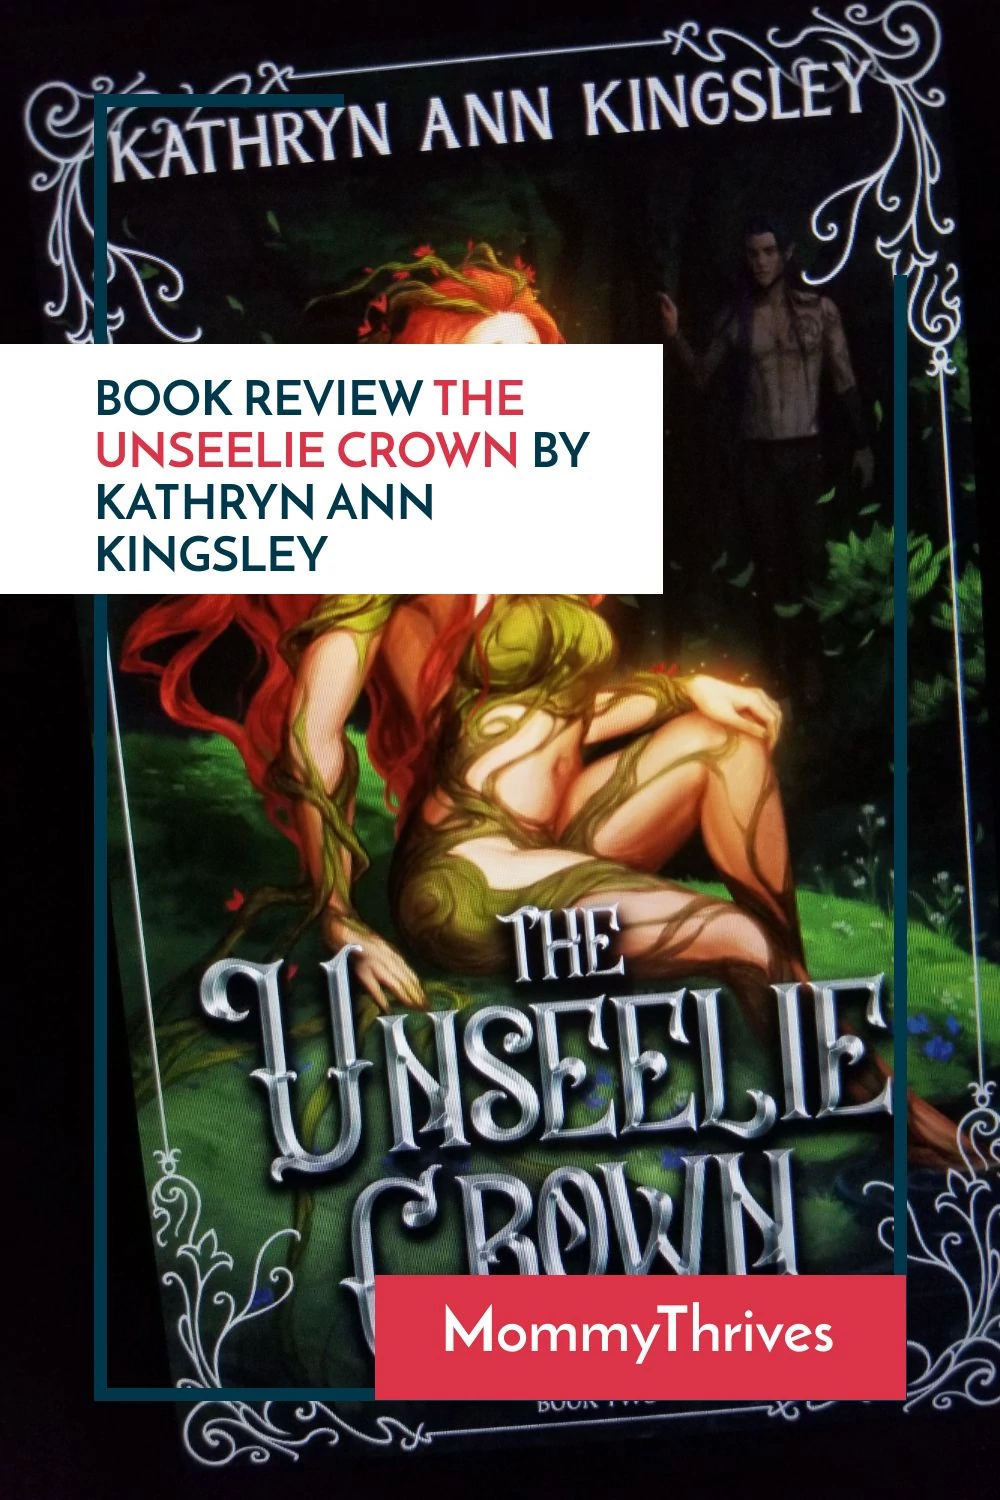 Adult Fantasy Romance Book Review - The Unseelie Crown Book Review - Maze of Shadows Series by Kathryn Ann Kingsley